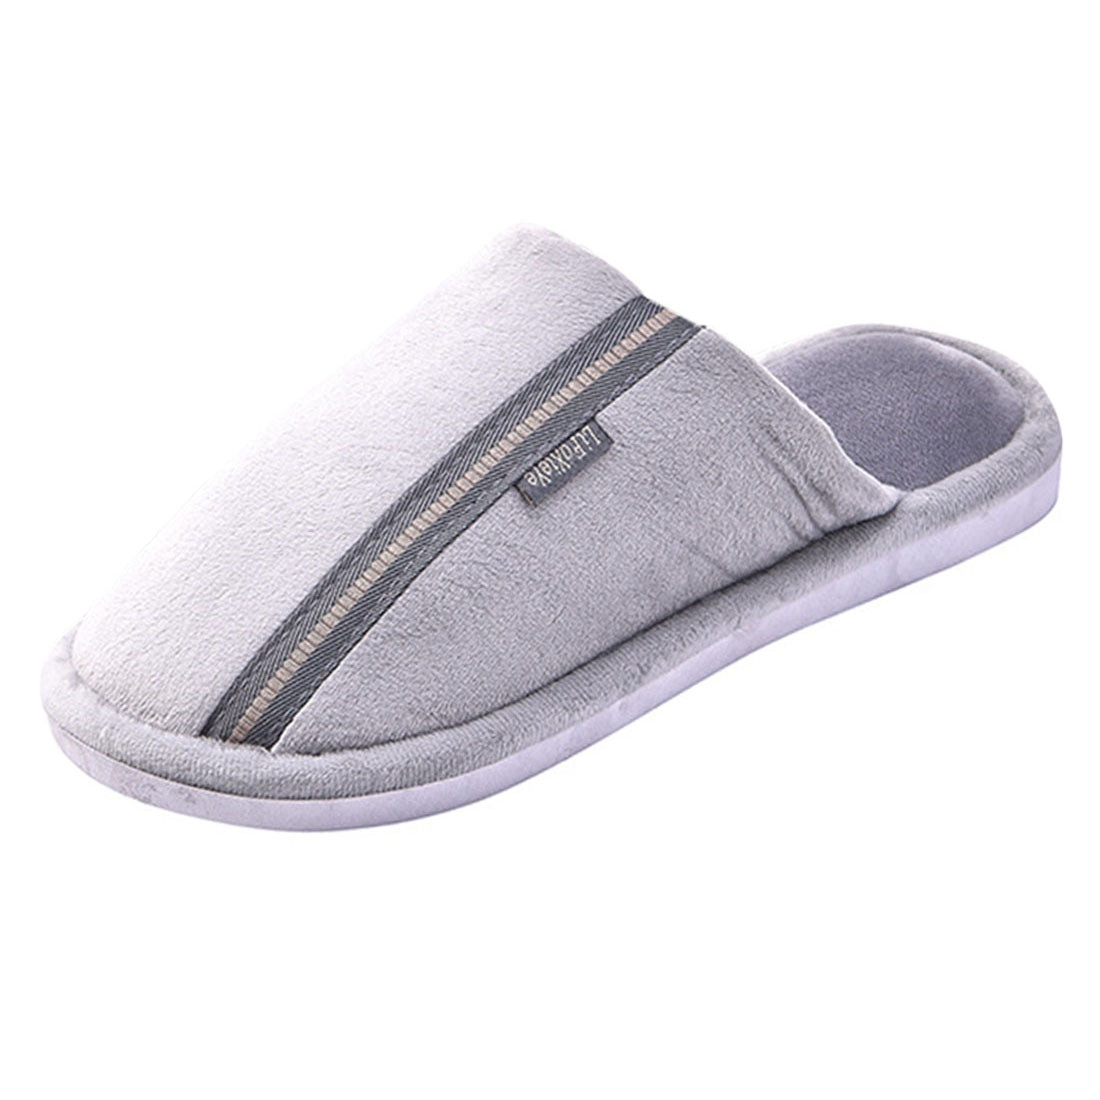 Boys Bedroom Slippers
 2018 New Indoor Slippers Male Soft Shoes Boy Cotton